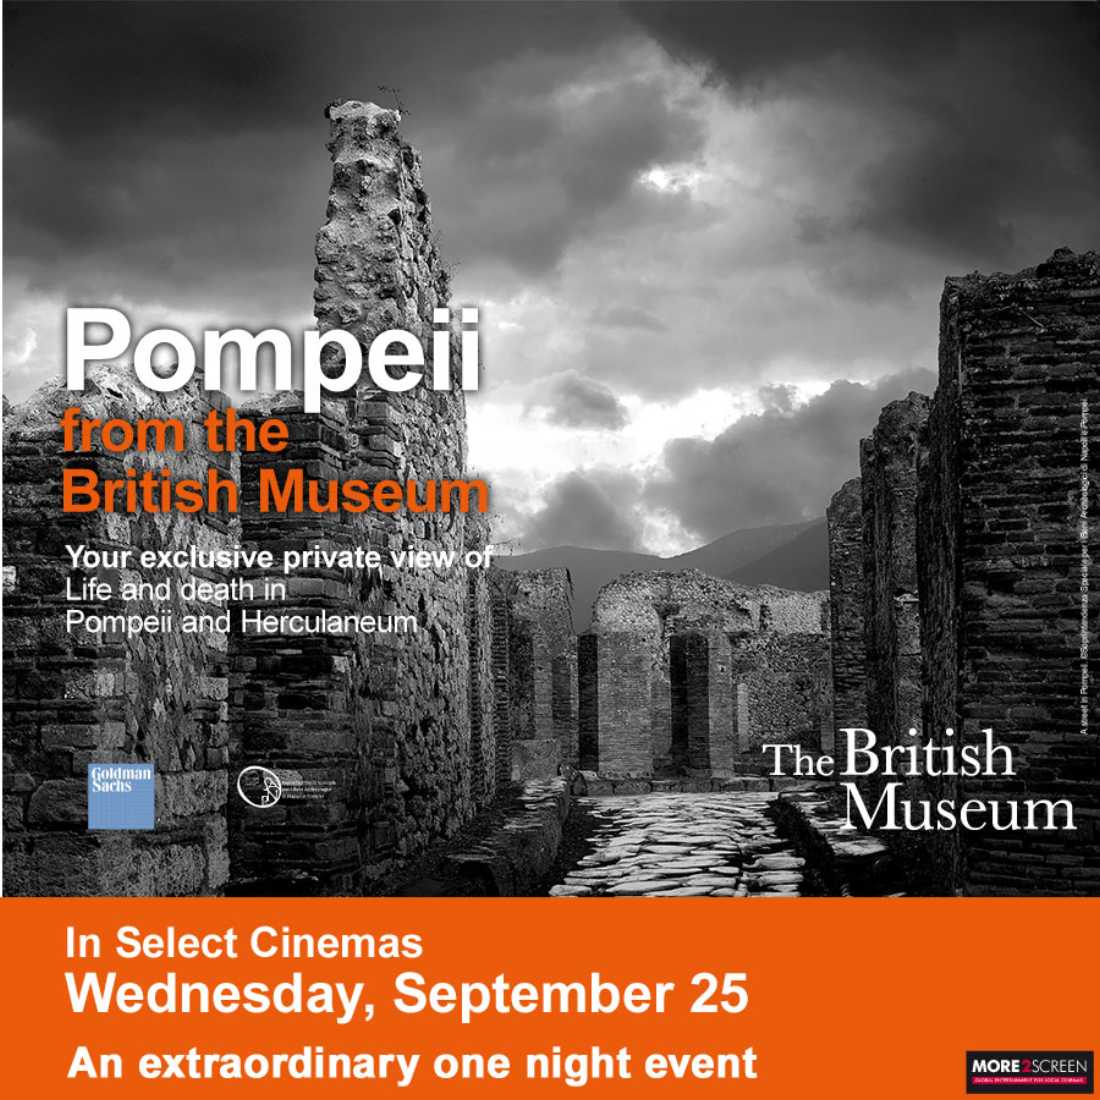 Pompeii at the British Museum screens at at 7:30pm at various movie theaters Wed, Sept 25.